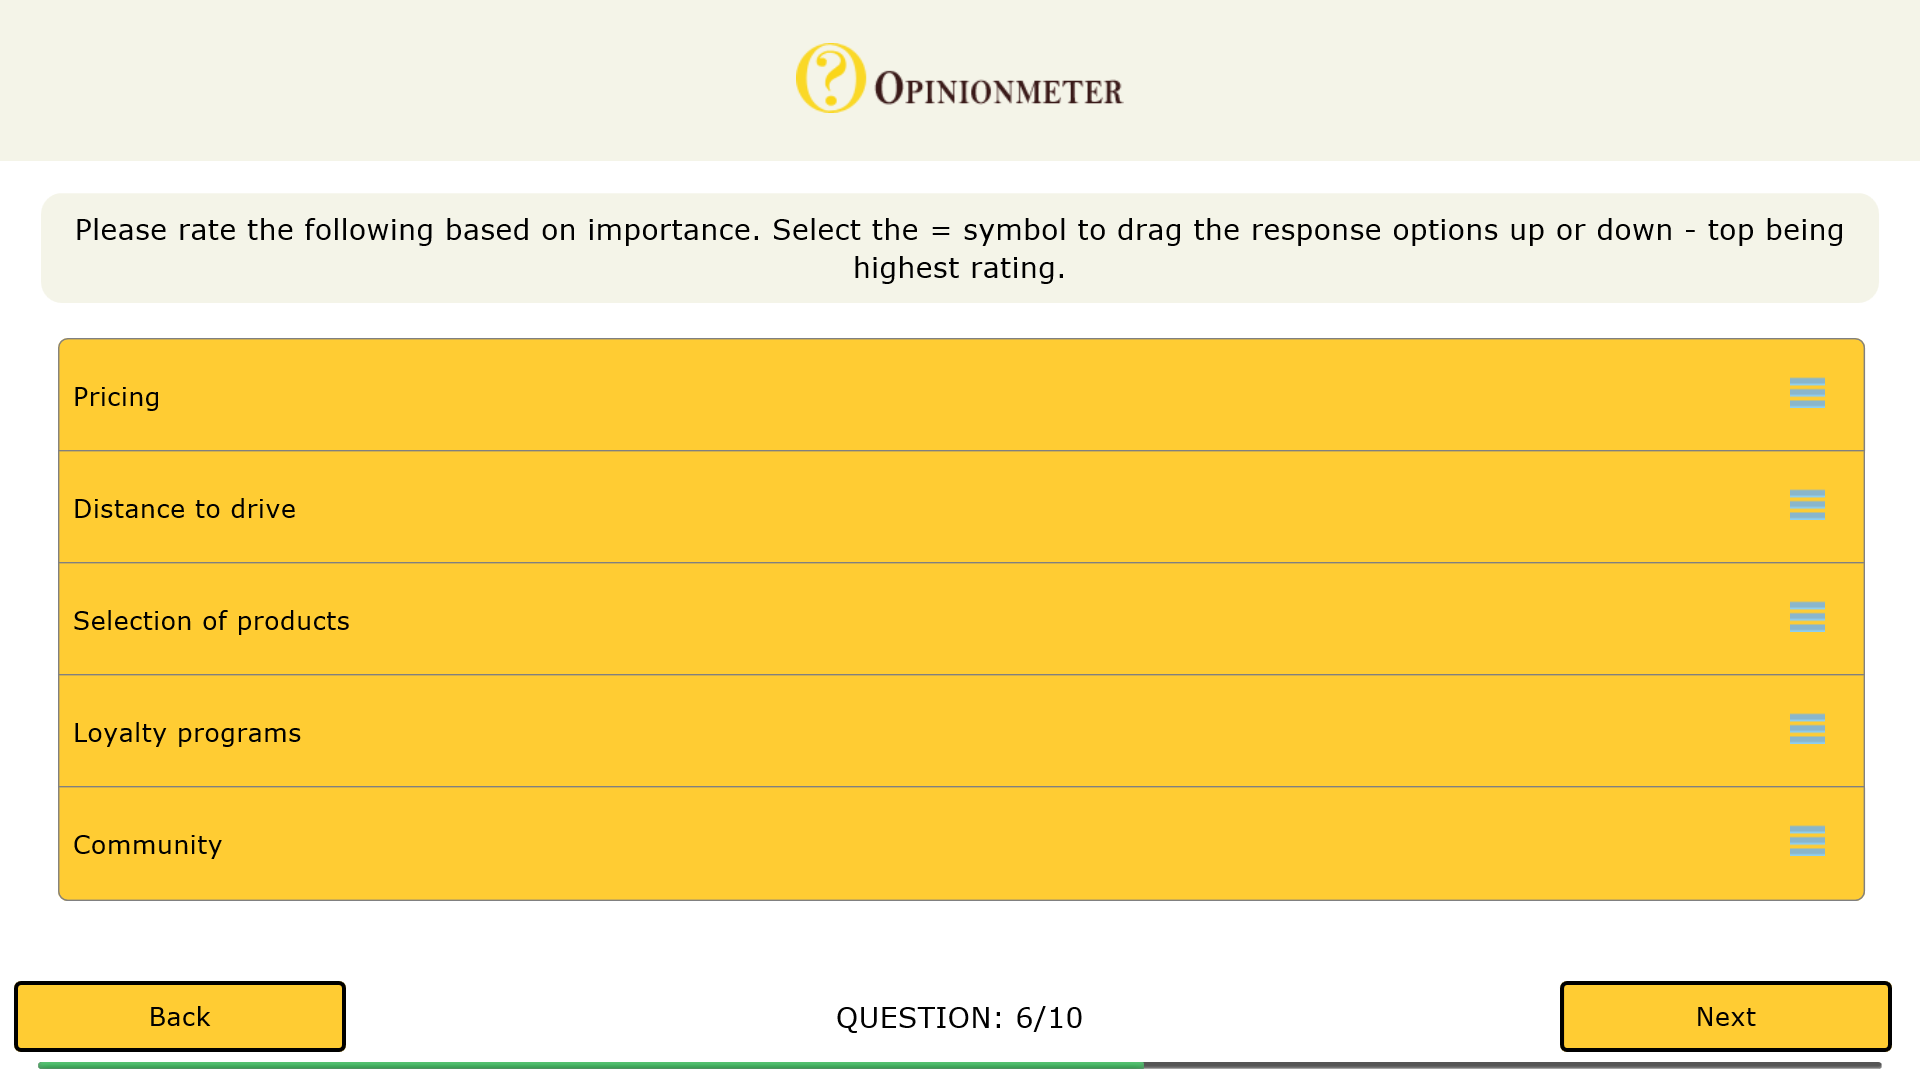 Ranking question allows users to slide response ordering